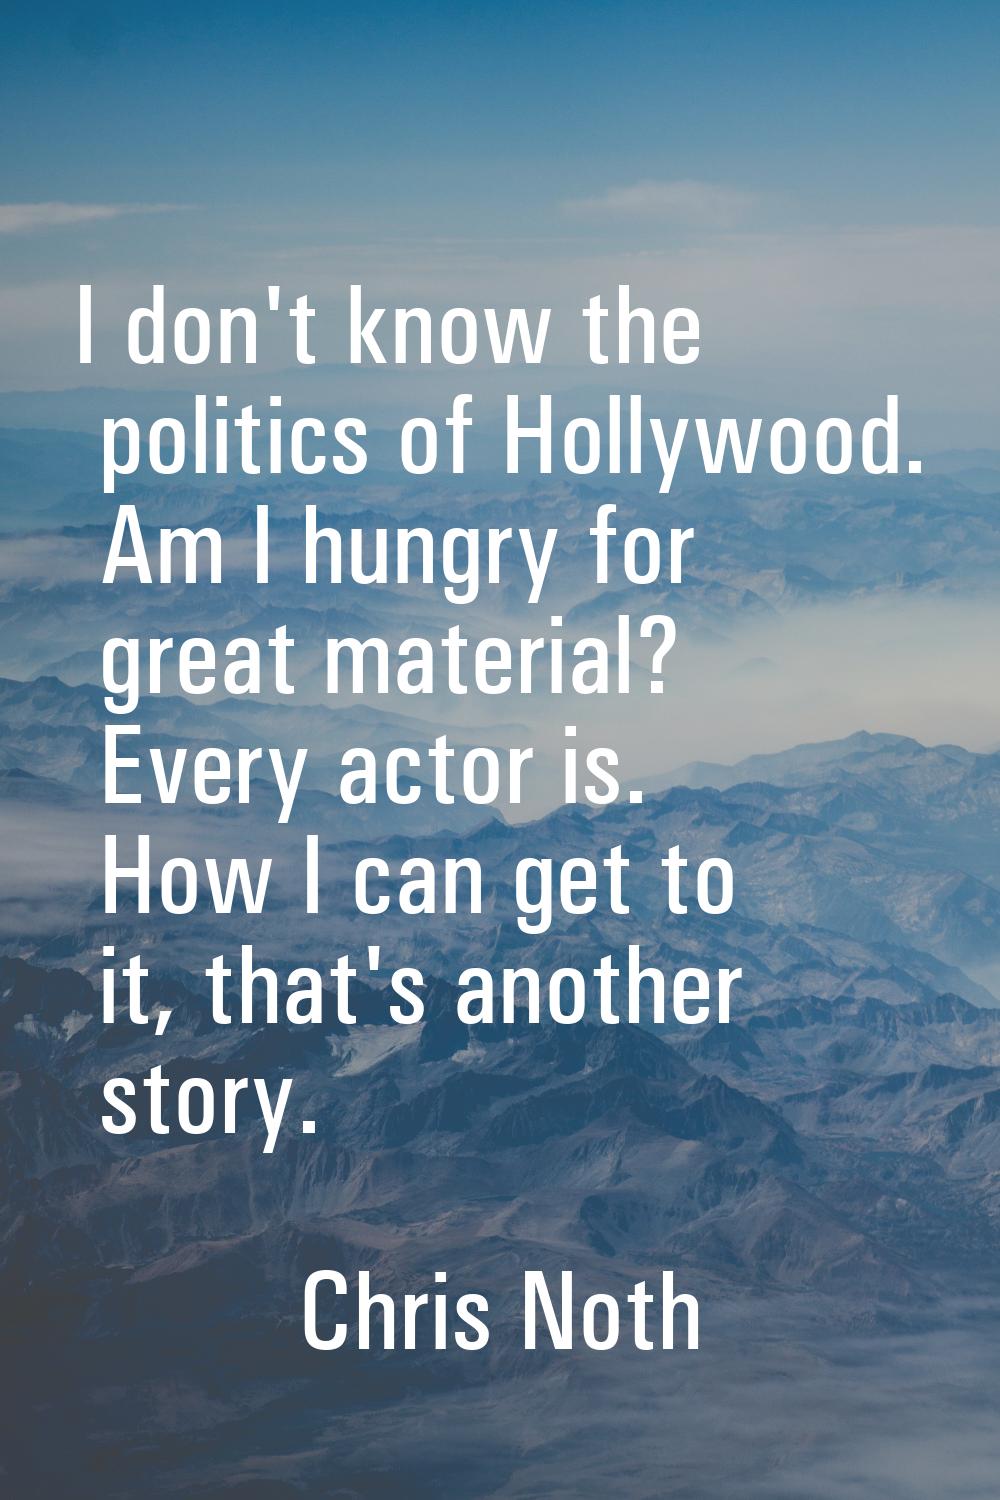 I don't know the politics of Hollywood. Am I hungry for great material? Every actor is. How I can g